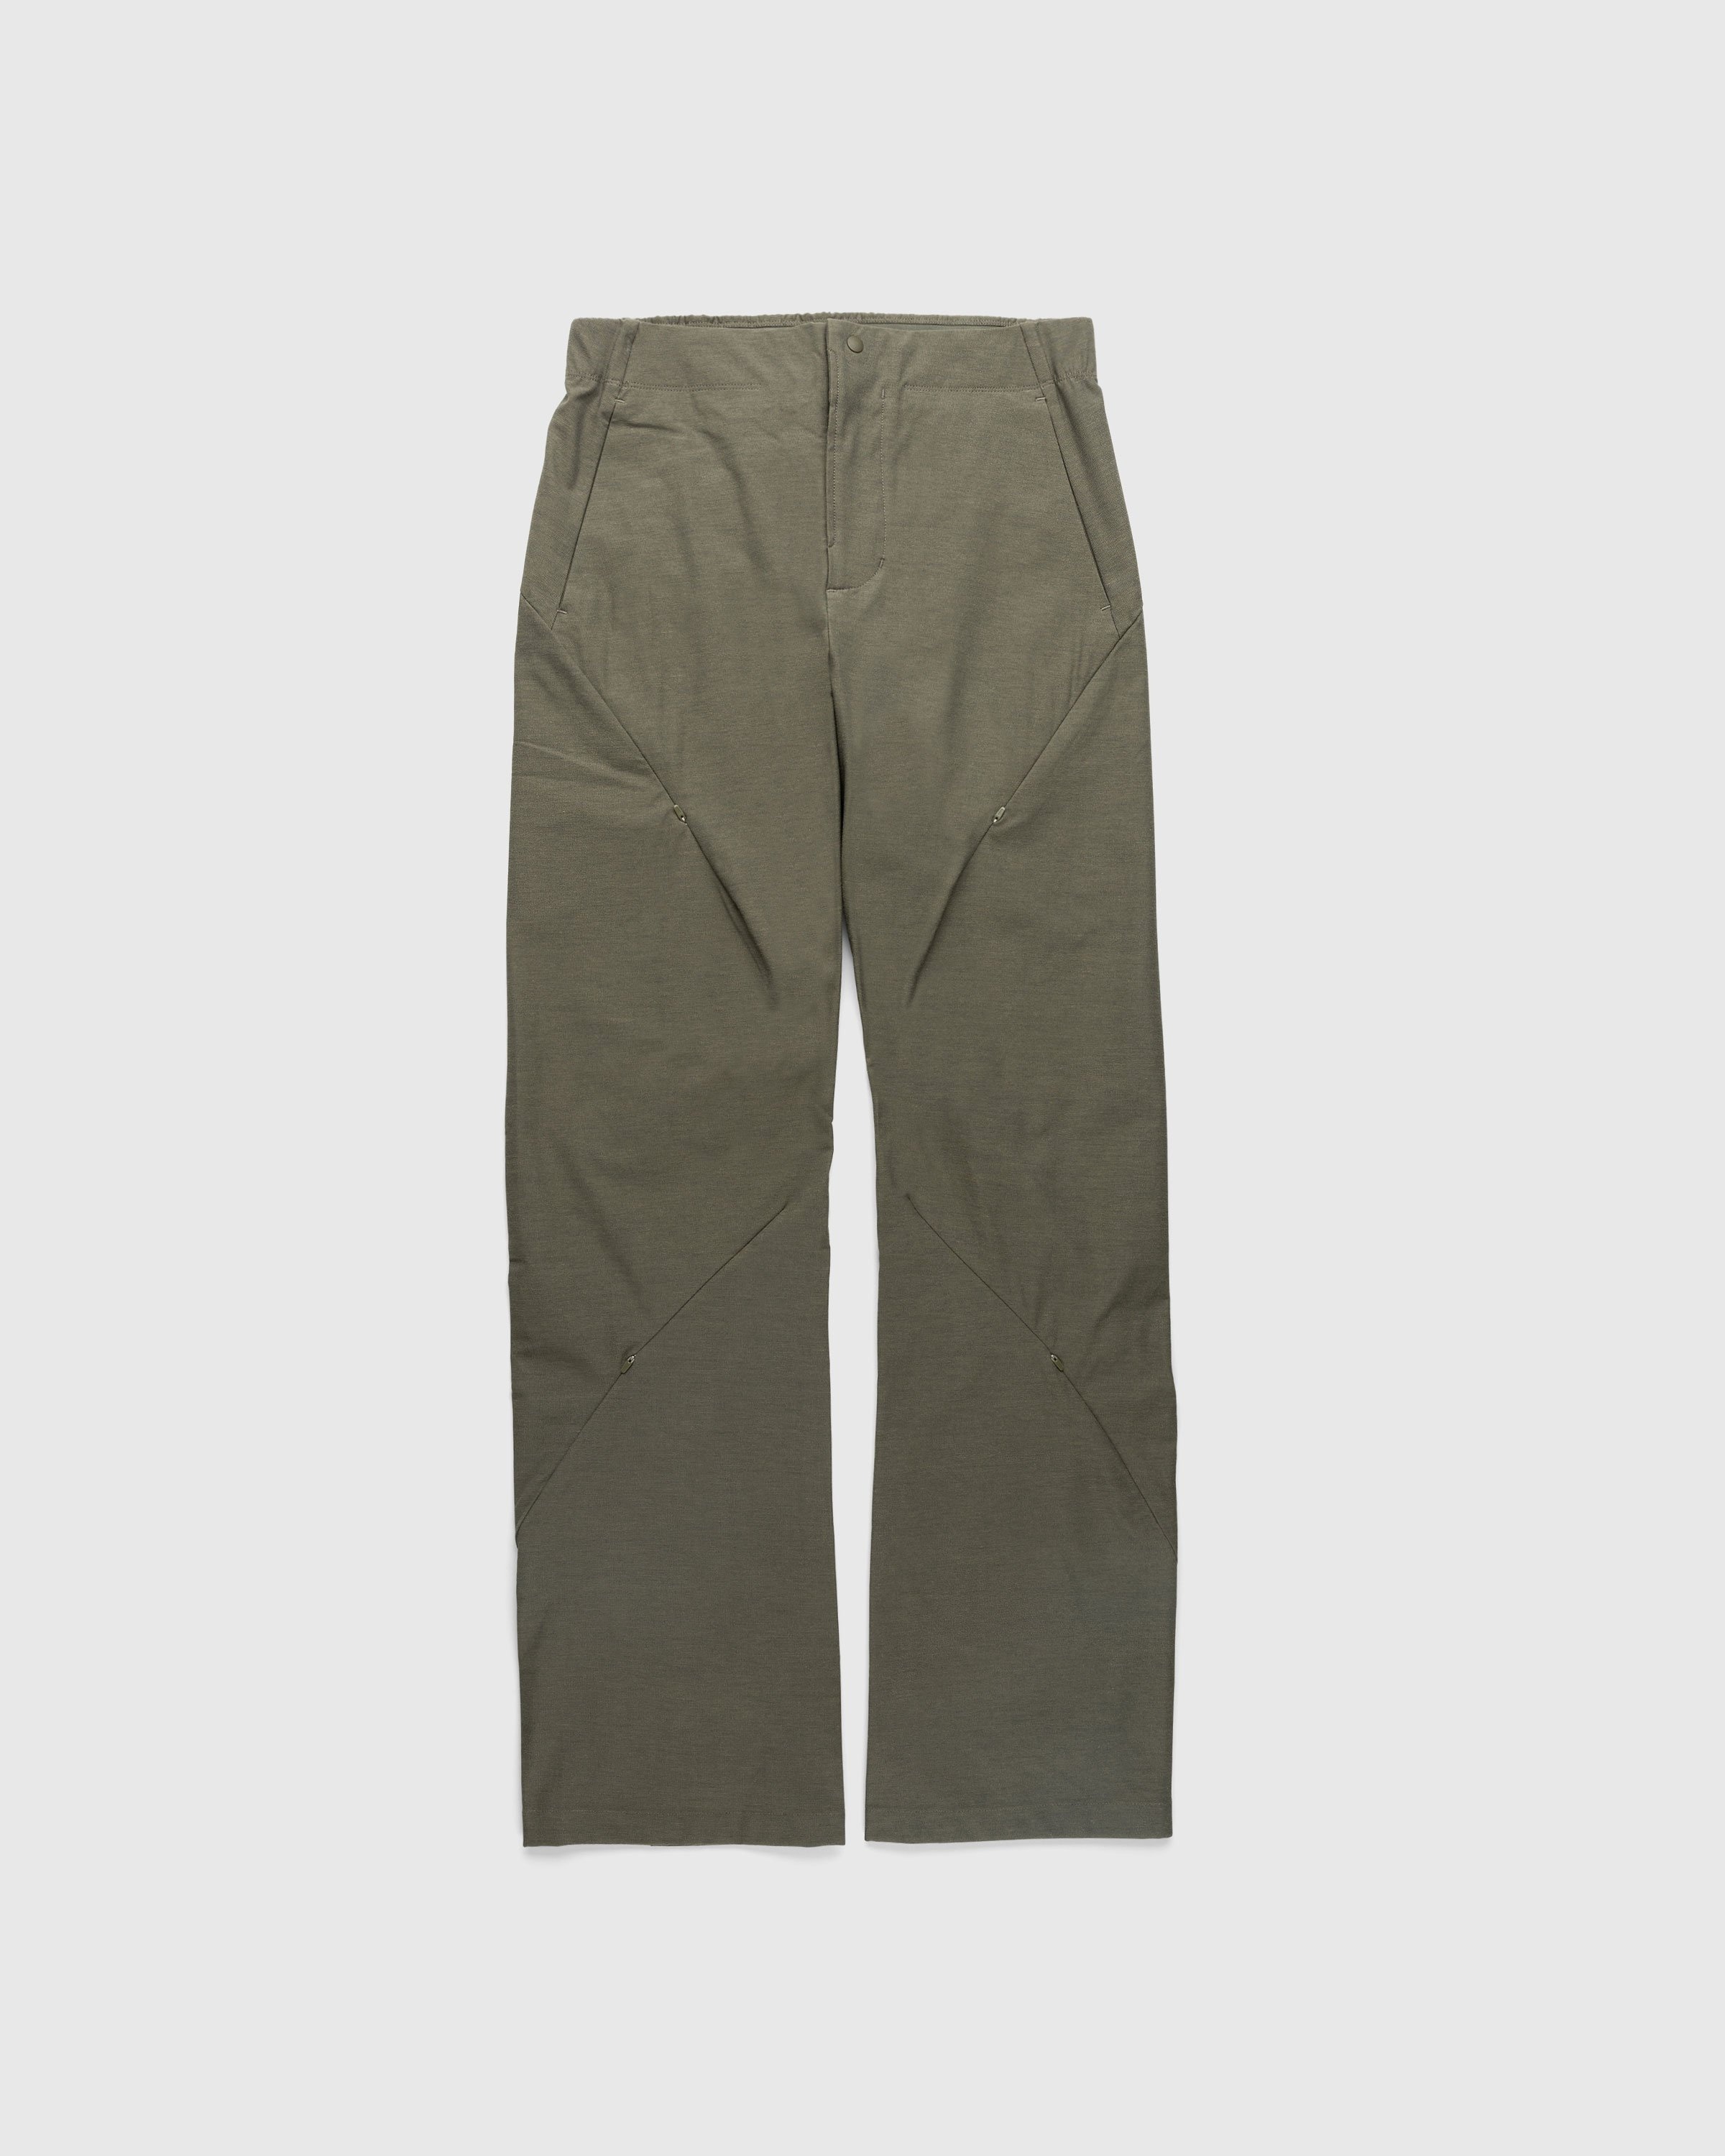 Post Archive Faction (PAF) – 5.1 Technical Pants Right Green